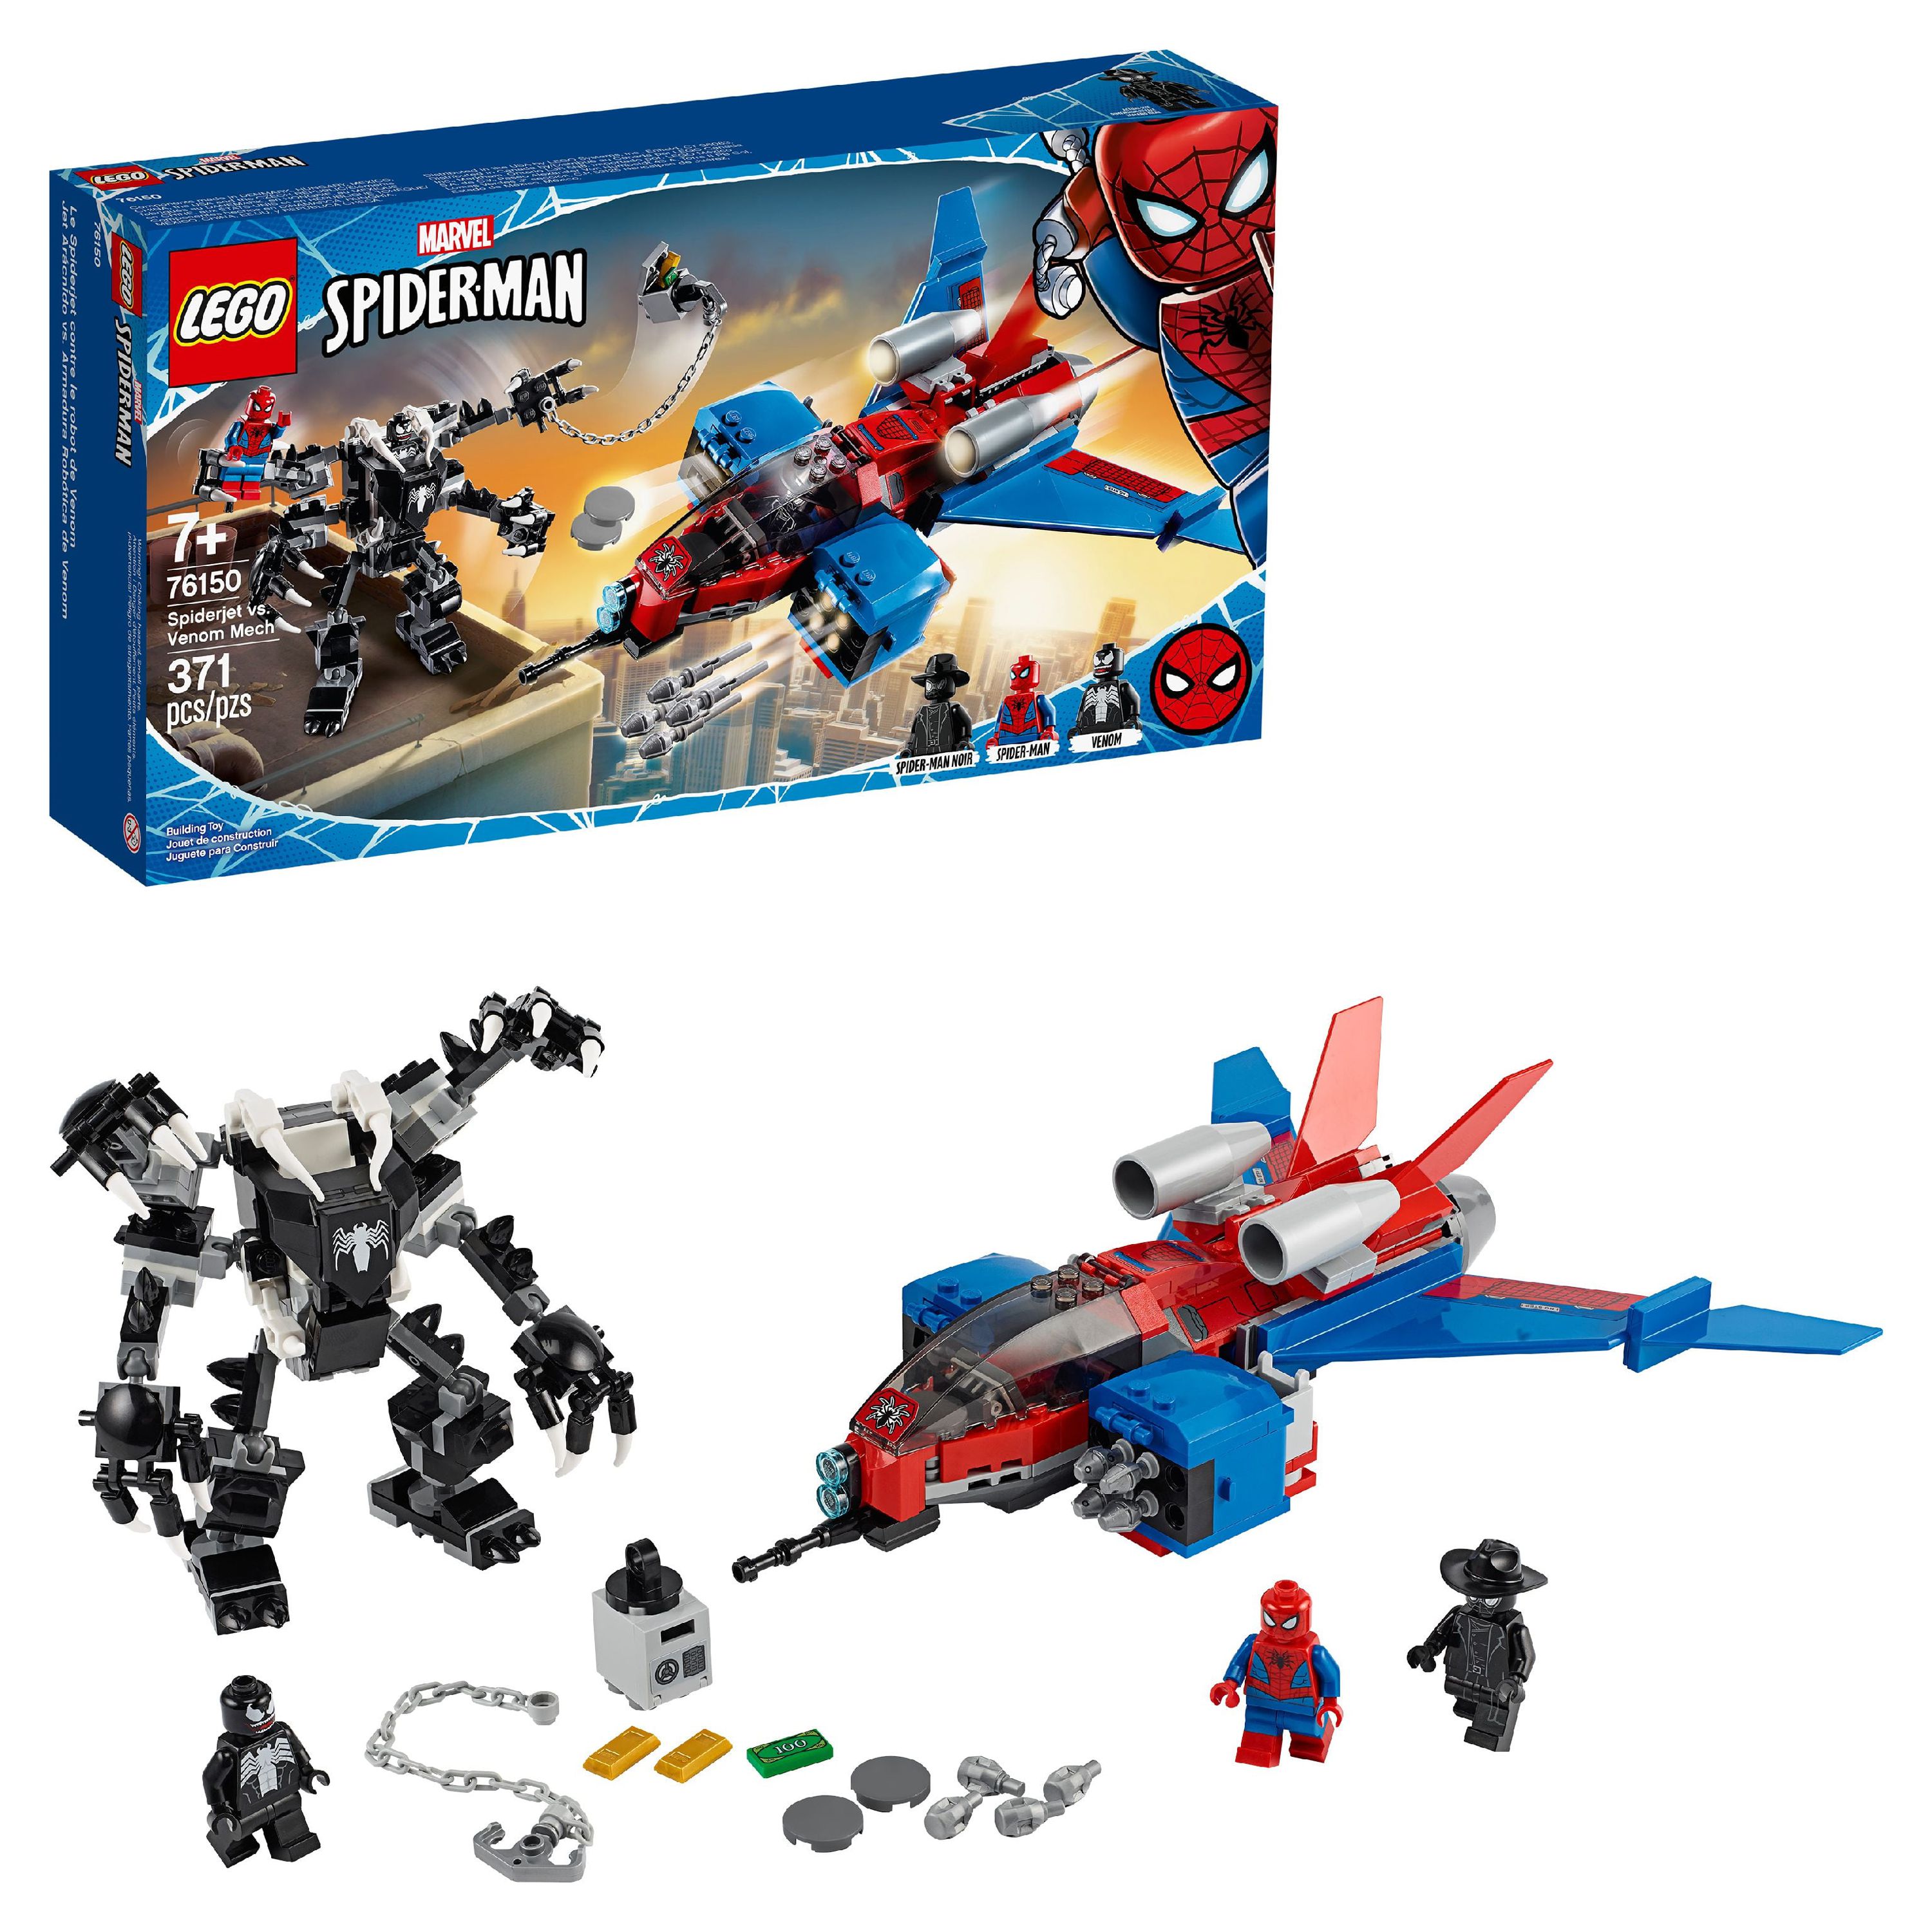 LEGO Marvel Spider-Man Spider-Jet vs Venom Mech 76150 Building Kit with Minifigures, Mech and Plane (371 Pieces) - image 1 of 7